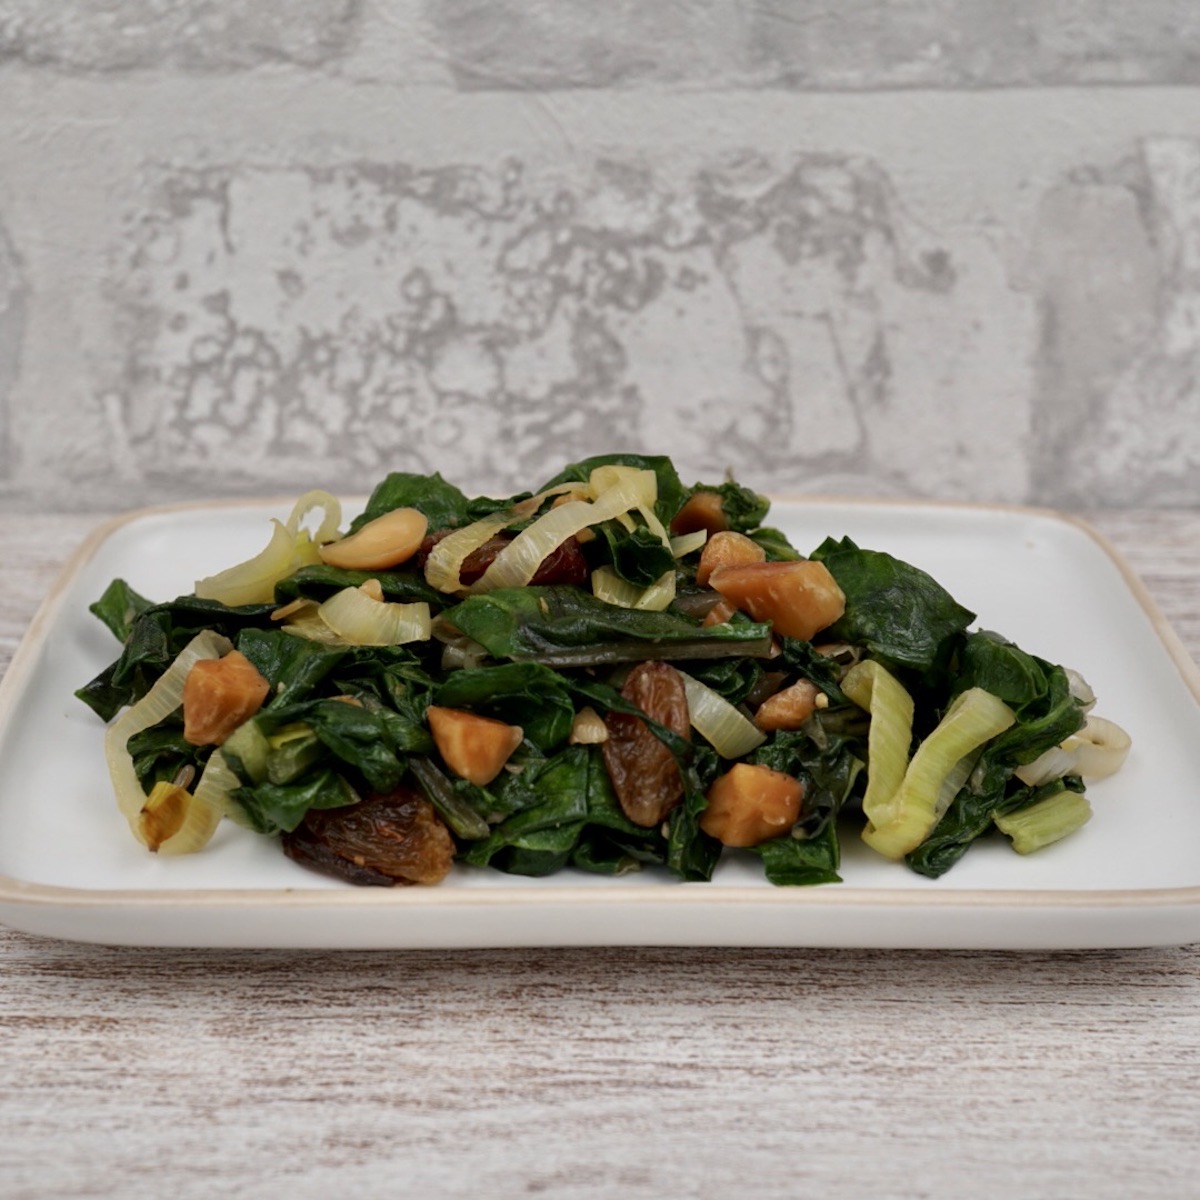 Swiss chard with almonds and raisins on a serving plate